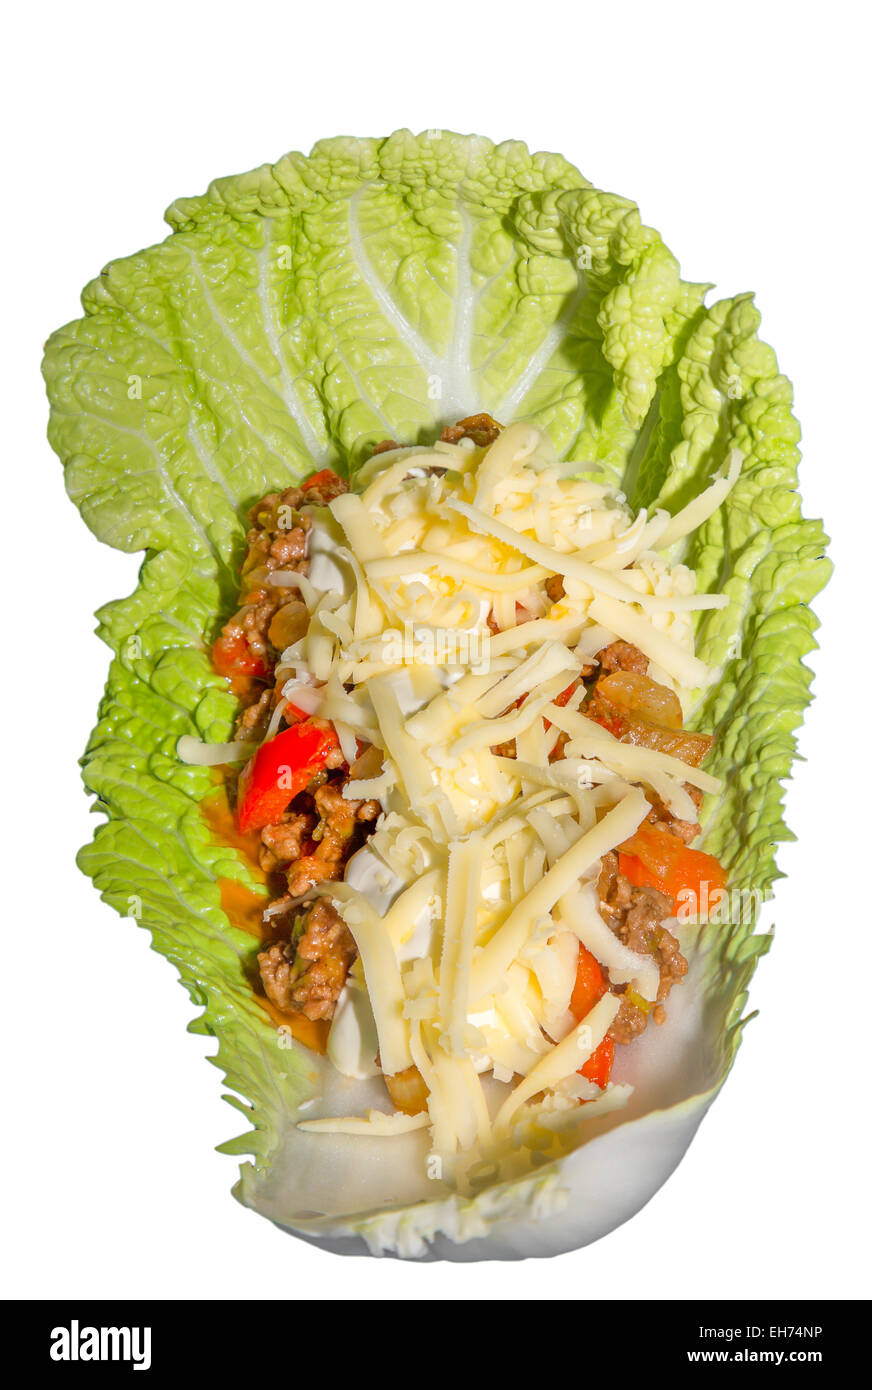 Picture of a salad leaf with a meat mixture with sour cream and cheese Stock Photo